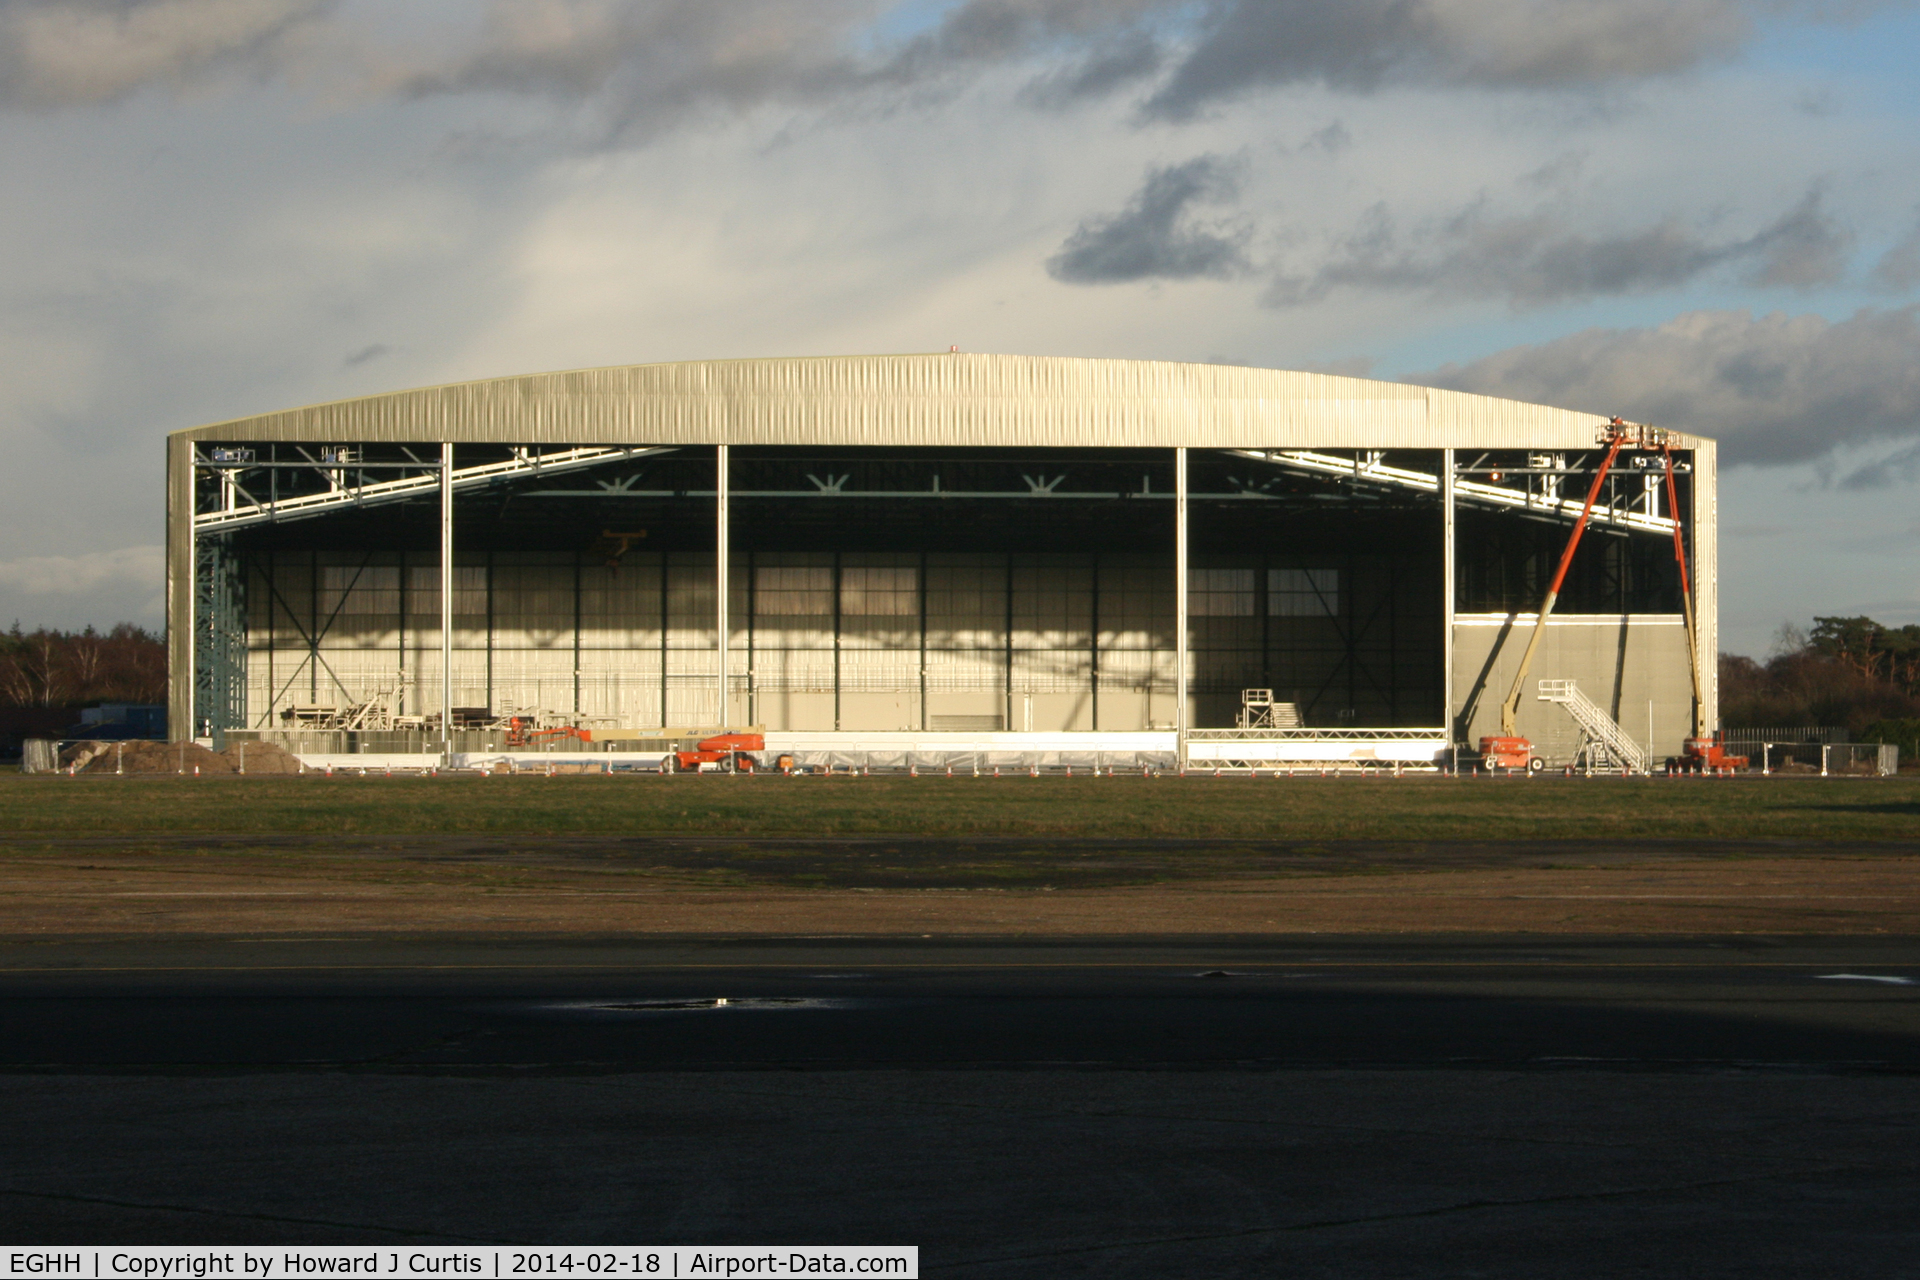 Bournemouth Airport, Bournemouth, England United Kingdom (EGHH) - Work continuing on the '747 hangar' (once the BASCO hangar).